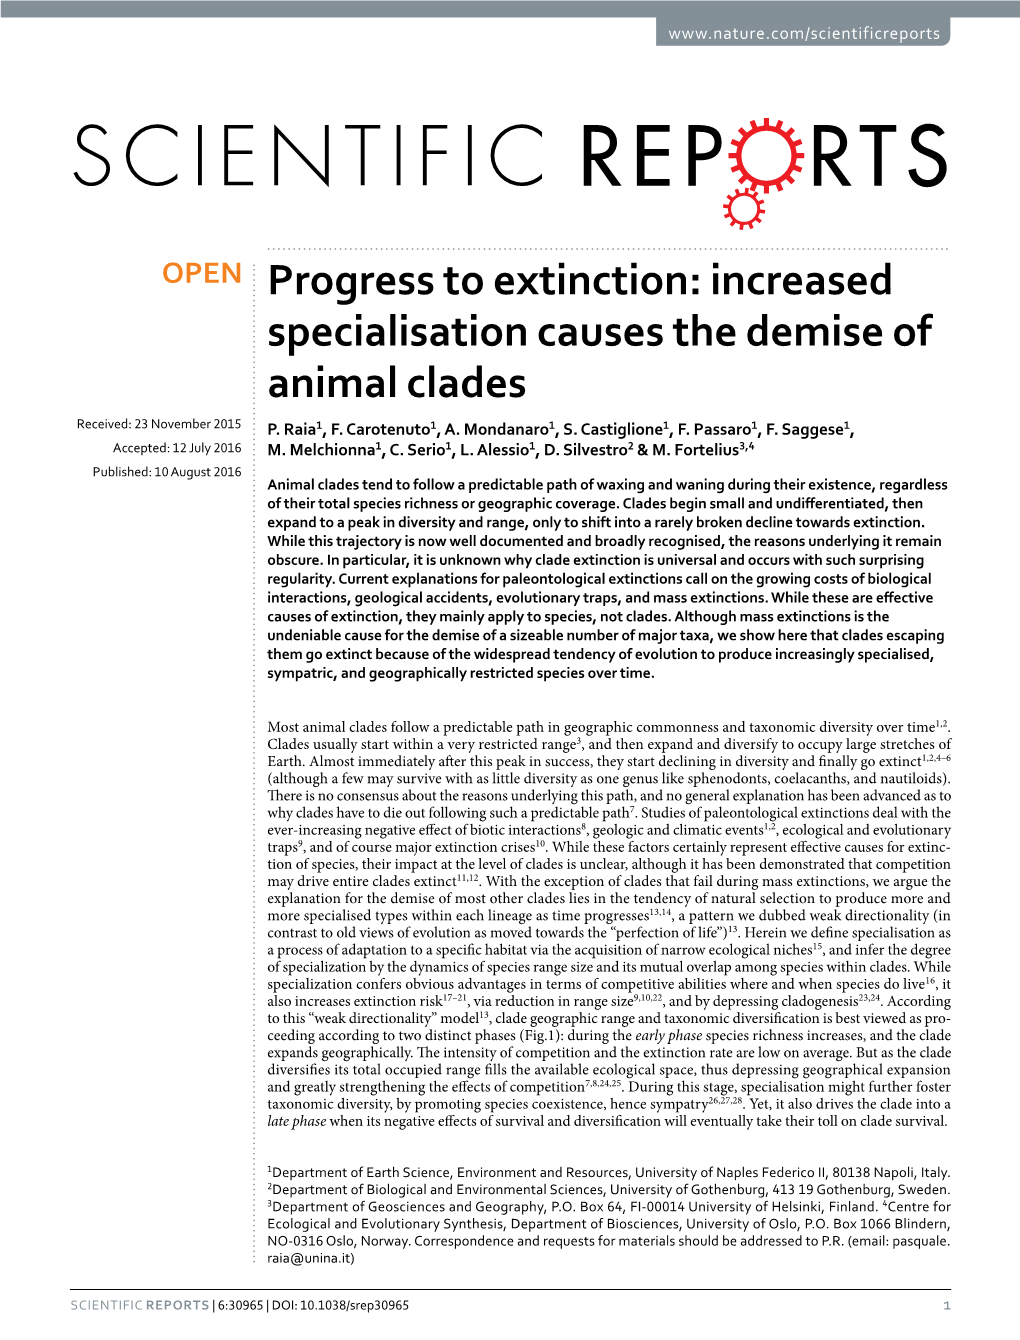 Progress to Extinction: Increased Specialisation Causes the Demise of Animal Clades Recei�E�: �3 �O�Em�Er �015 P